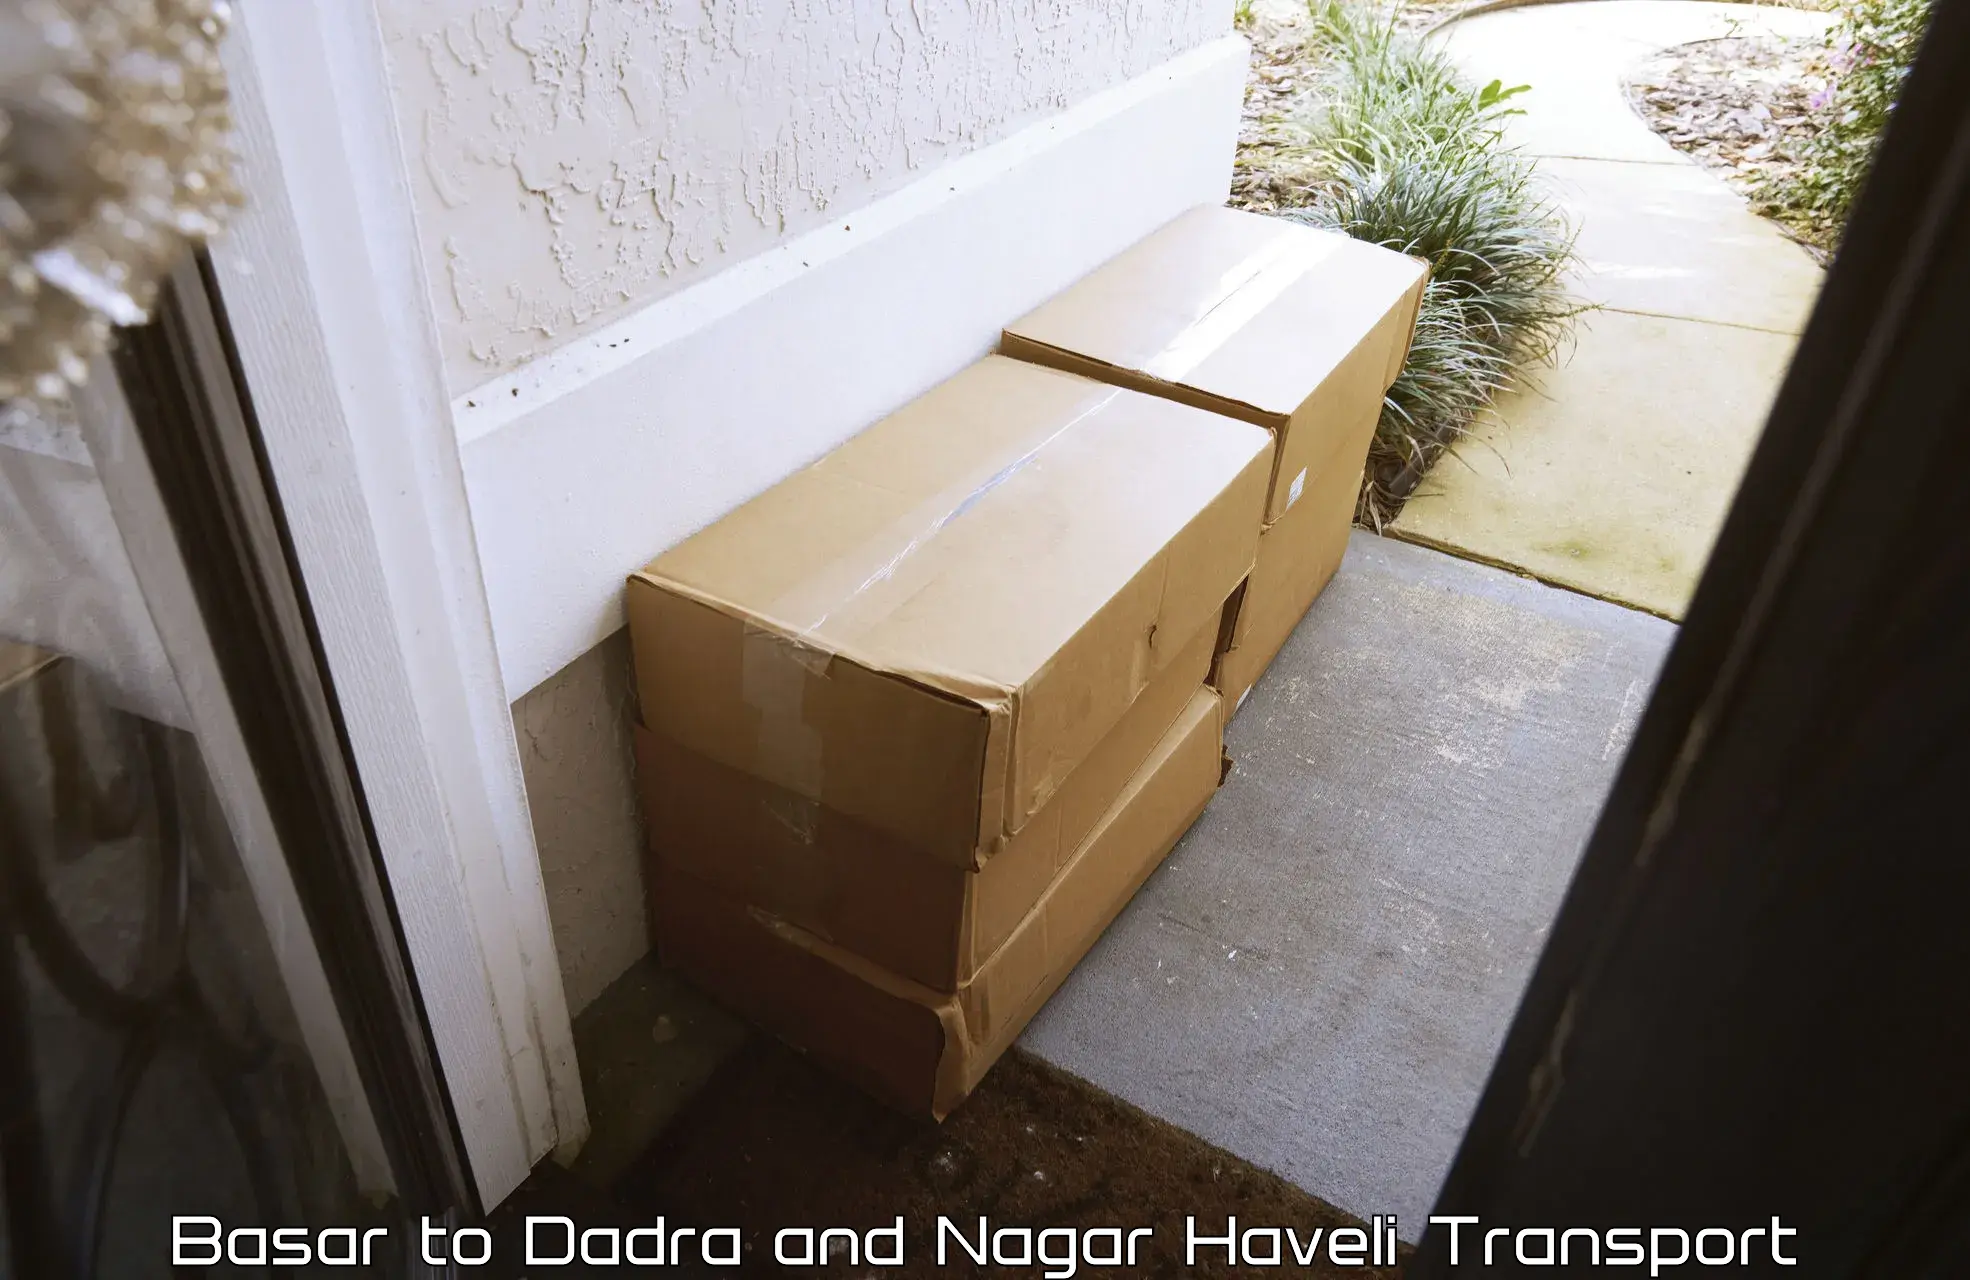 Material transport services in Basar to Dadra and Nagar Haveli